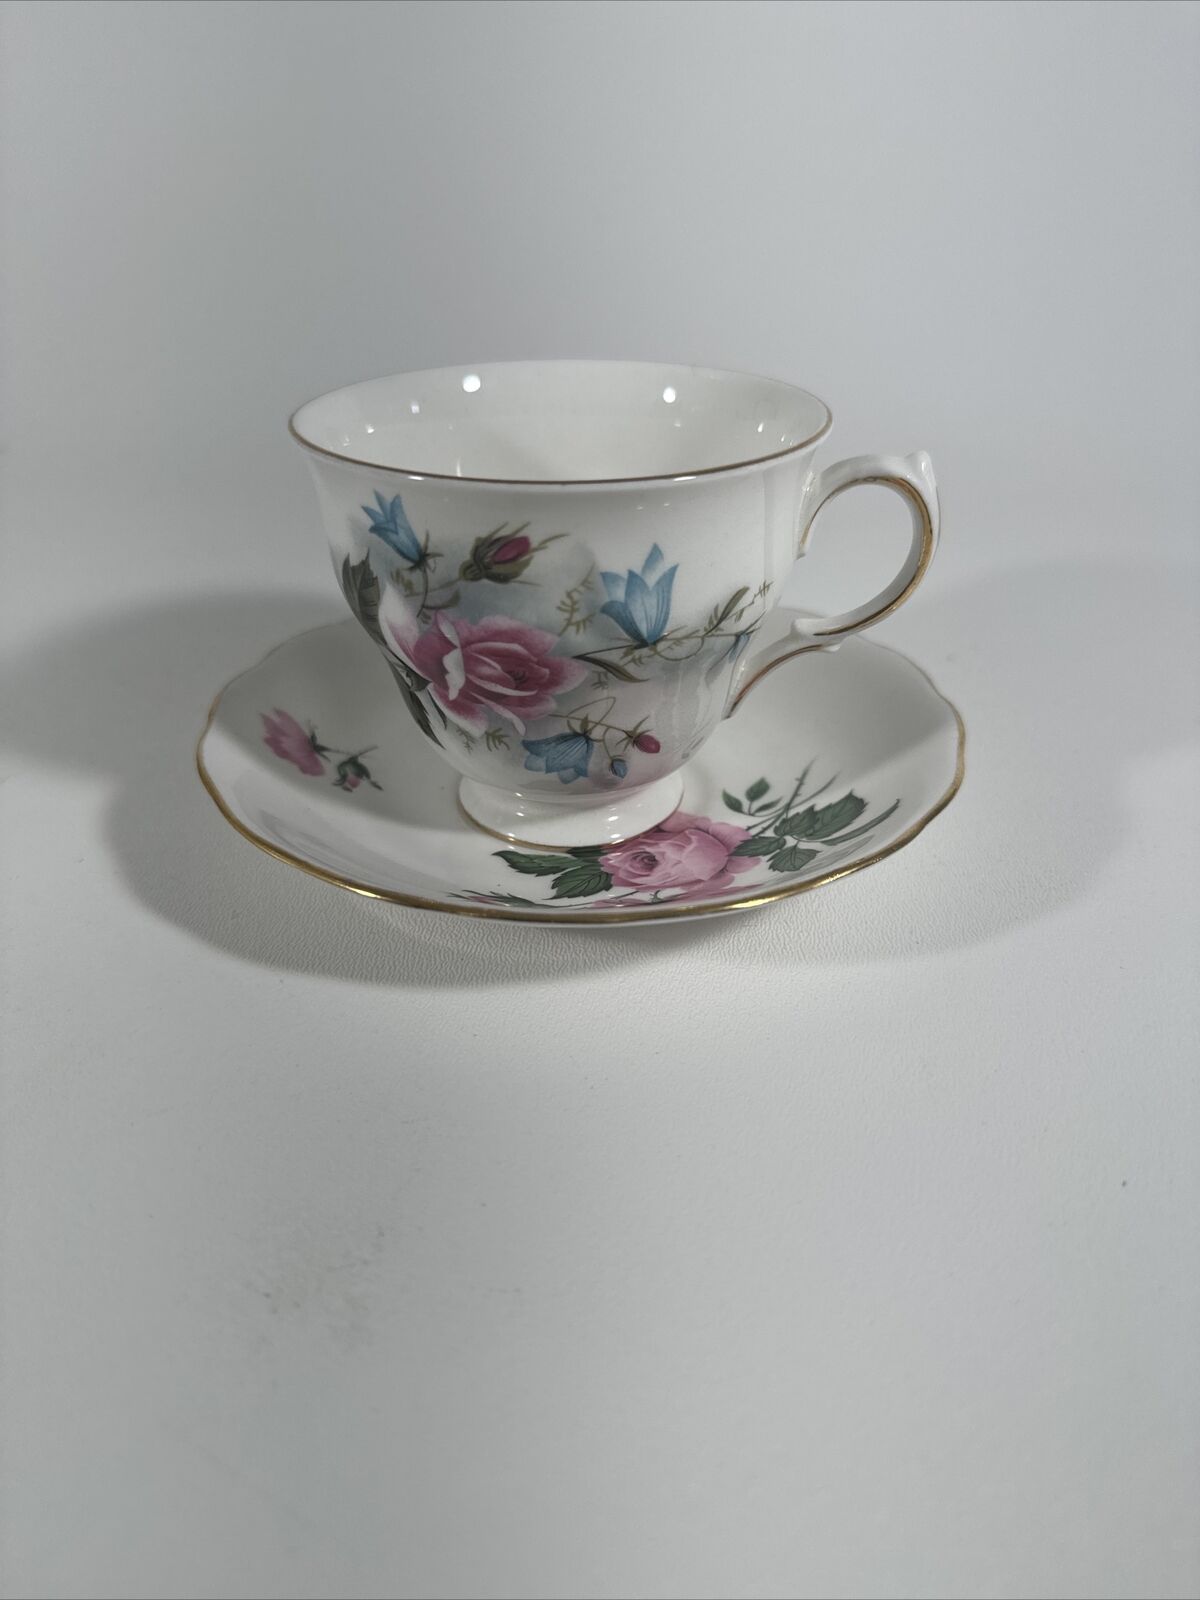 Vintage Queen Anne Bone China Teacup And Saucer